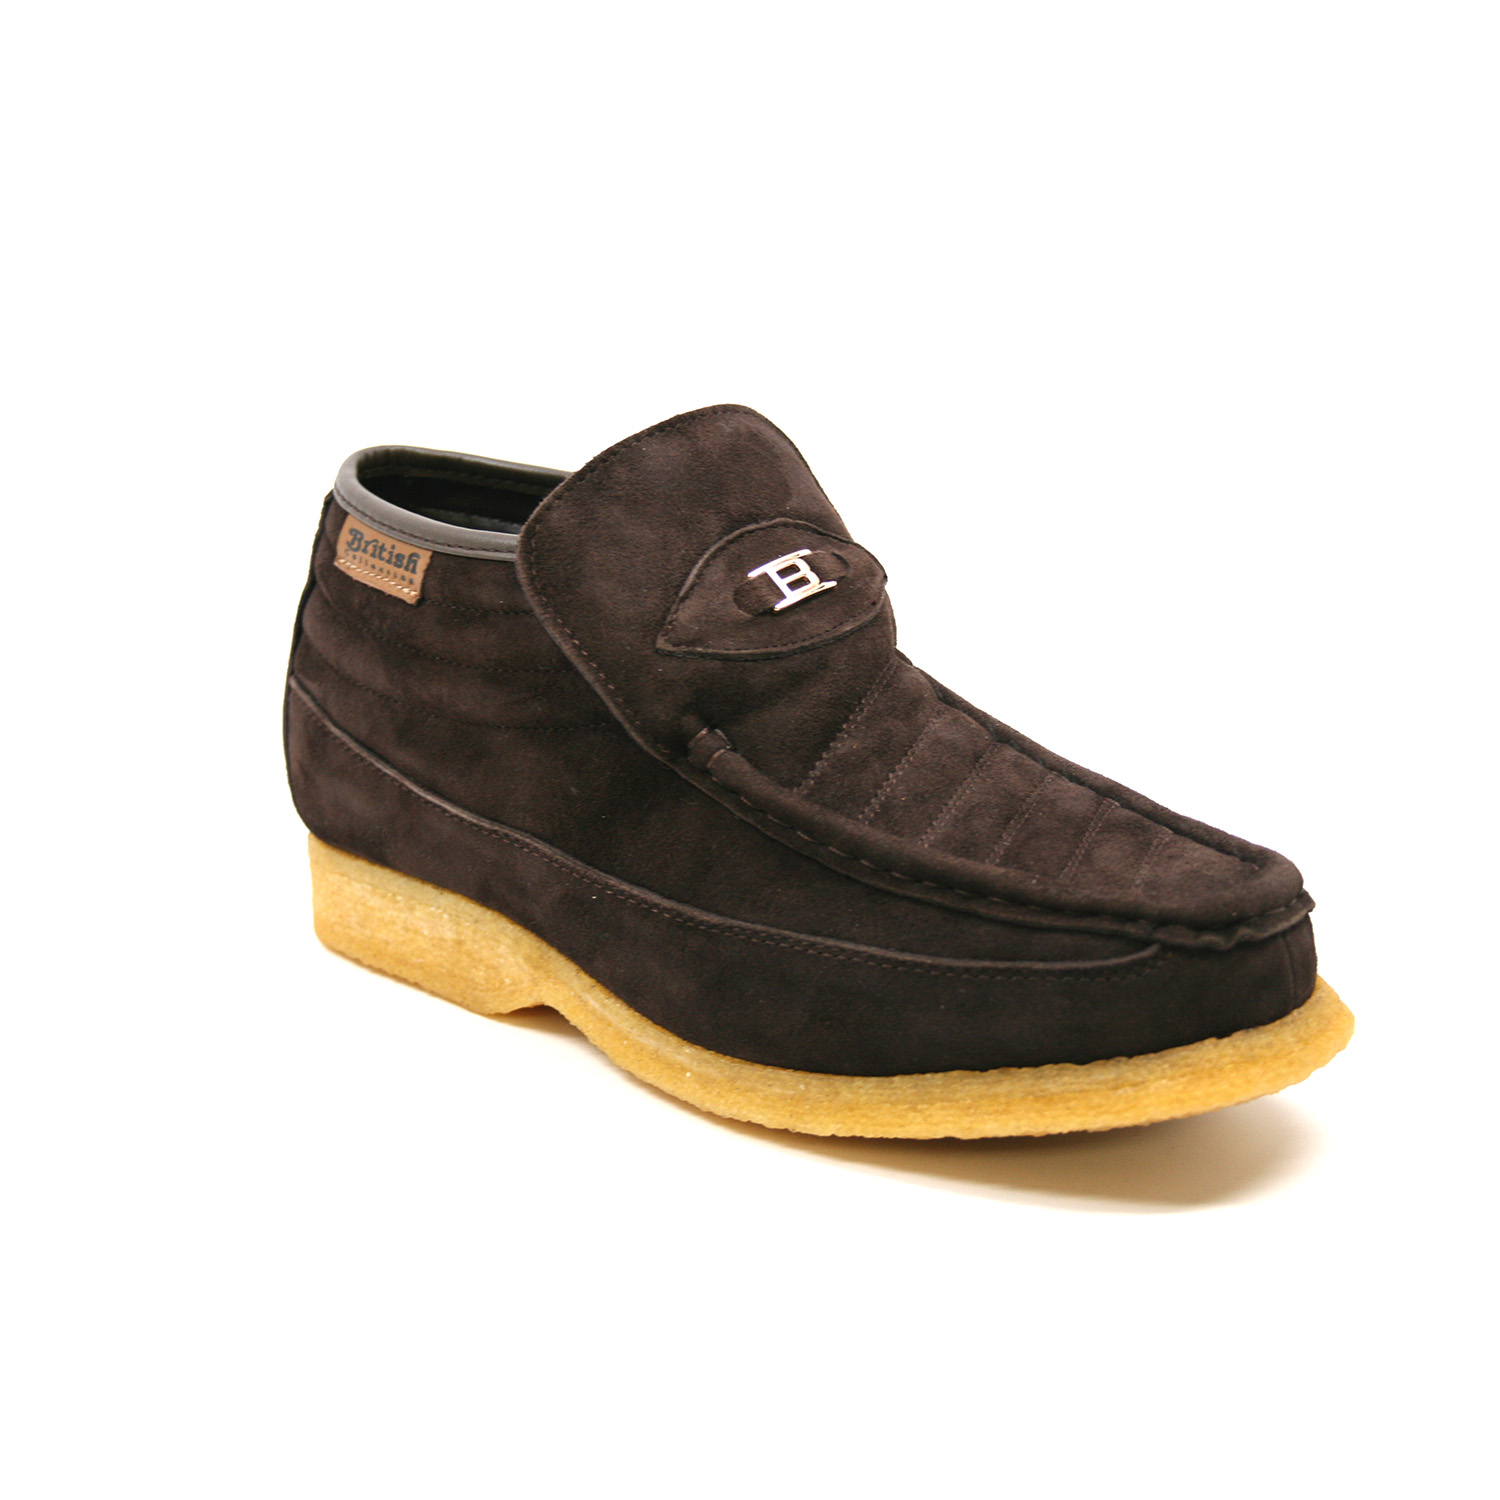 British Collection-Liberty Brown Suede High Slip-on [666-3] - $159.00 ...